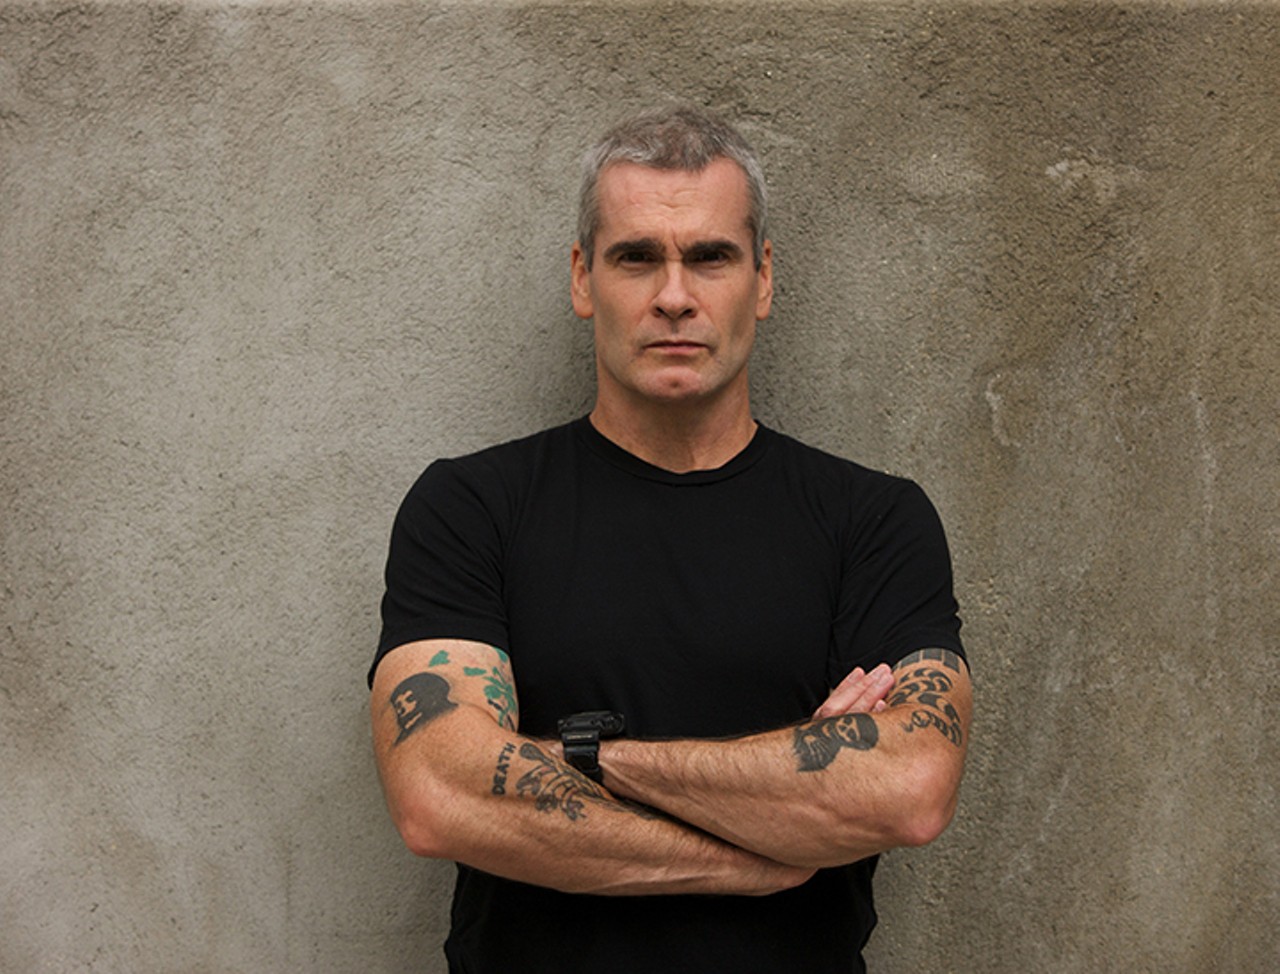 Saturday, Oct. 8Henry Rollins at the Plaza Live